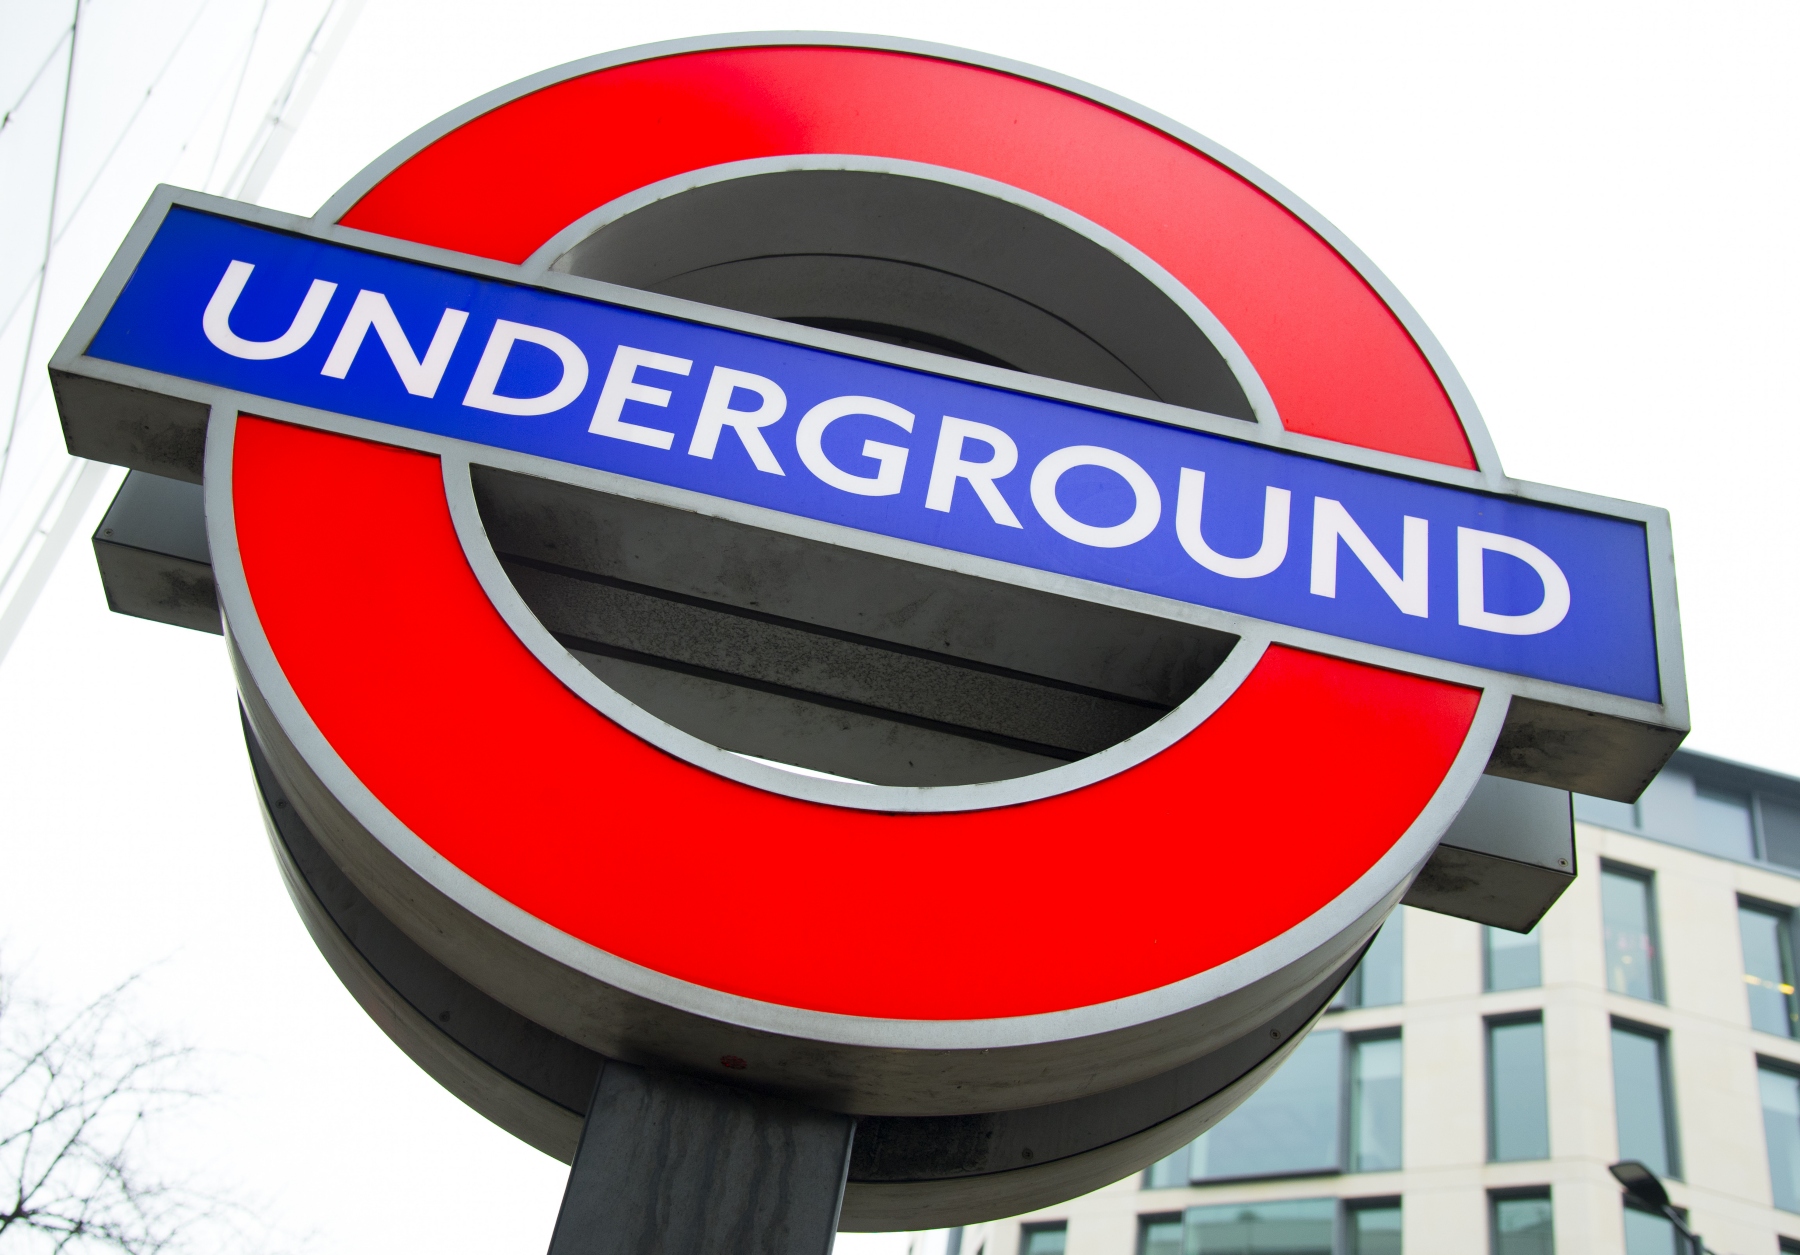 London Tube closures this weekend: See the full list